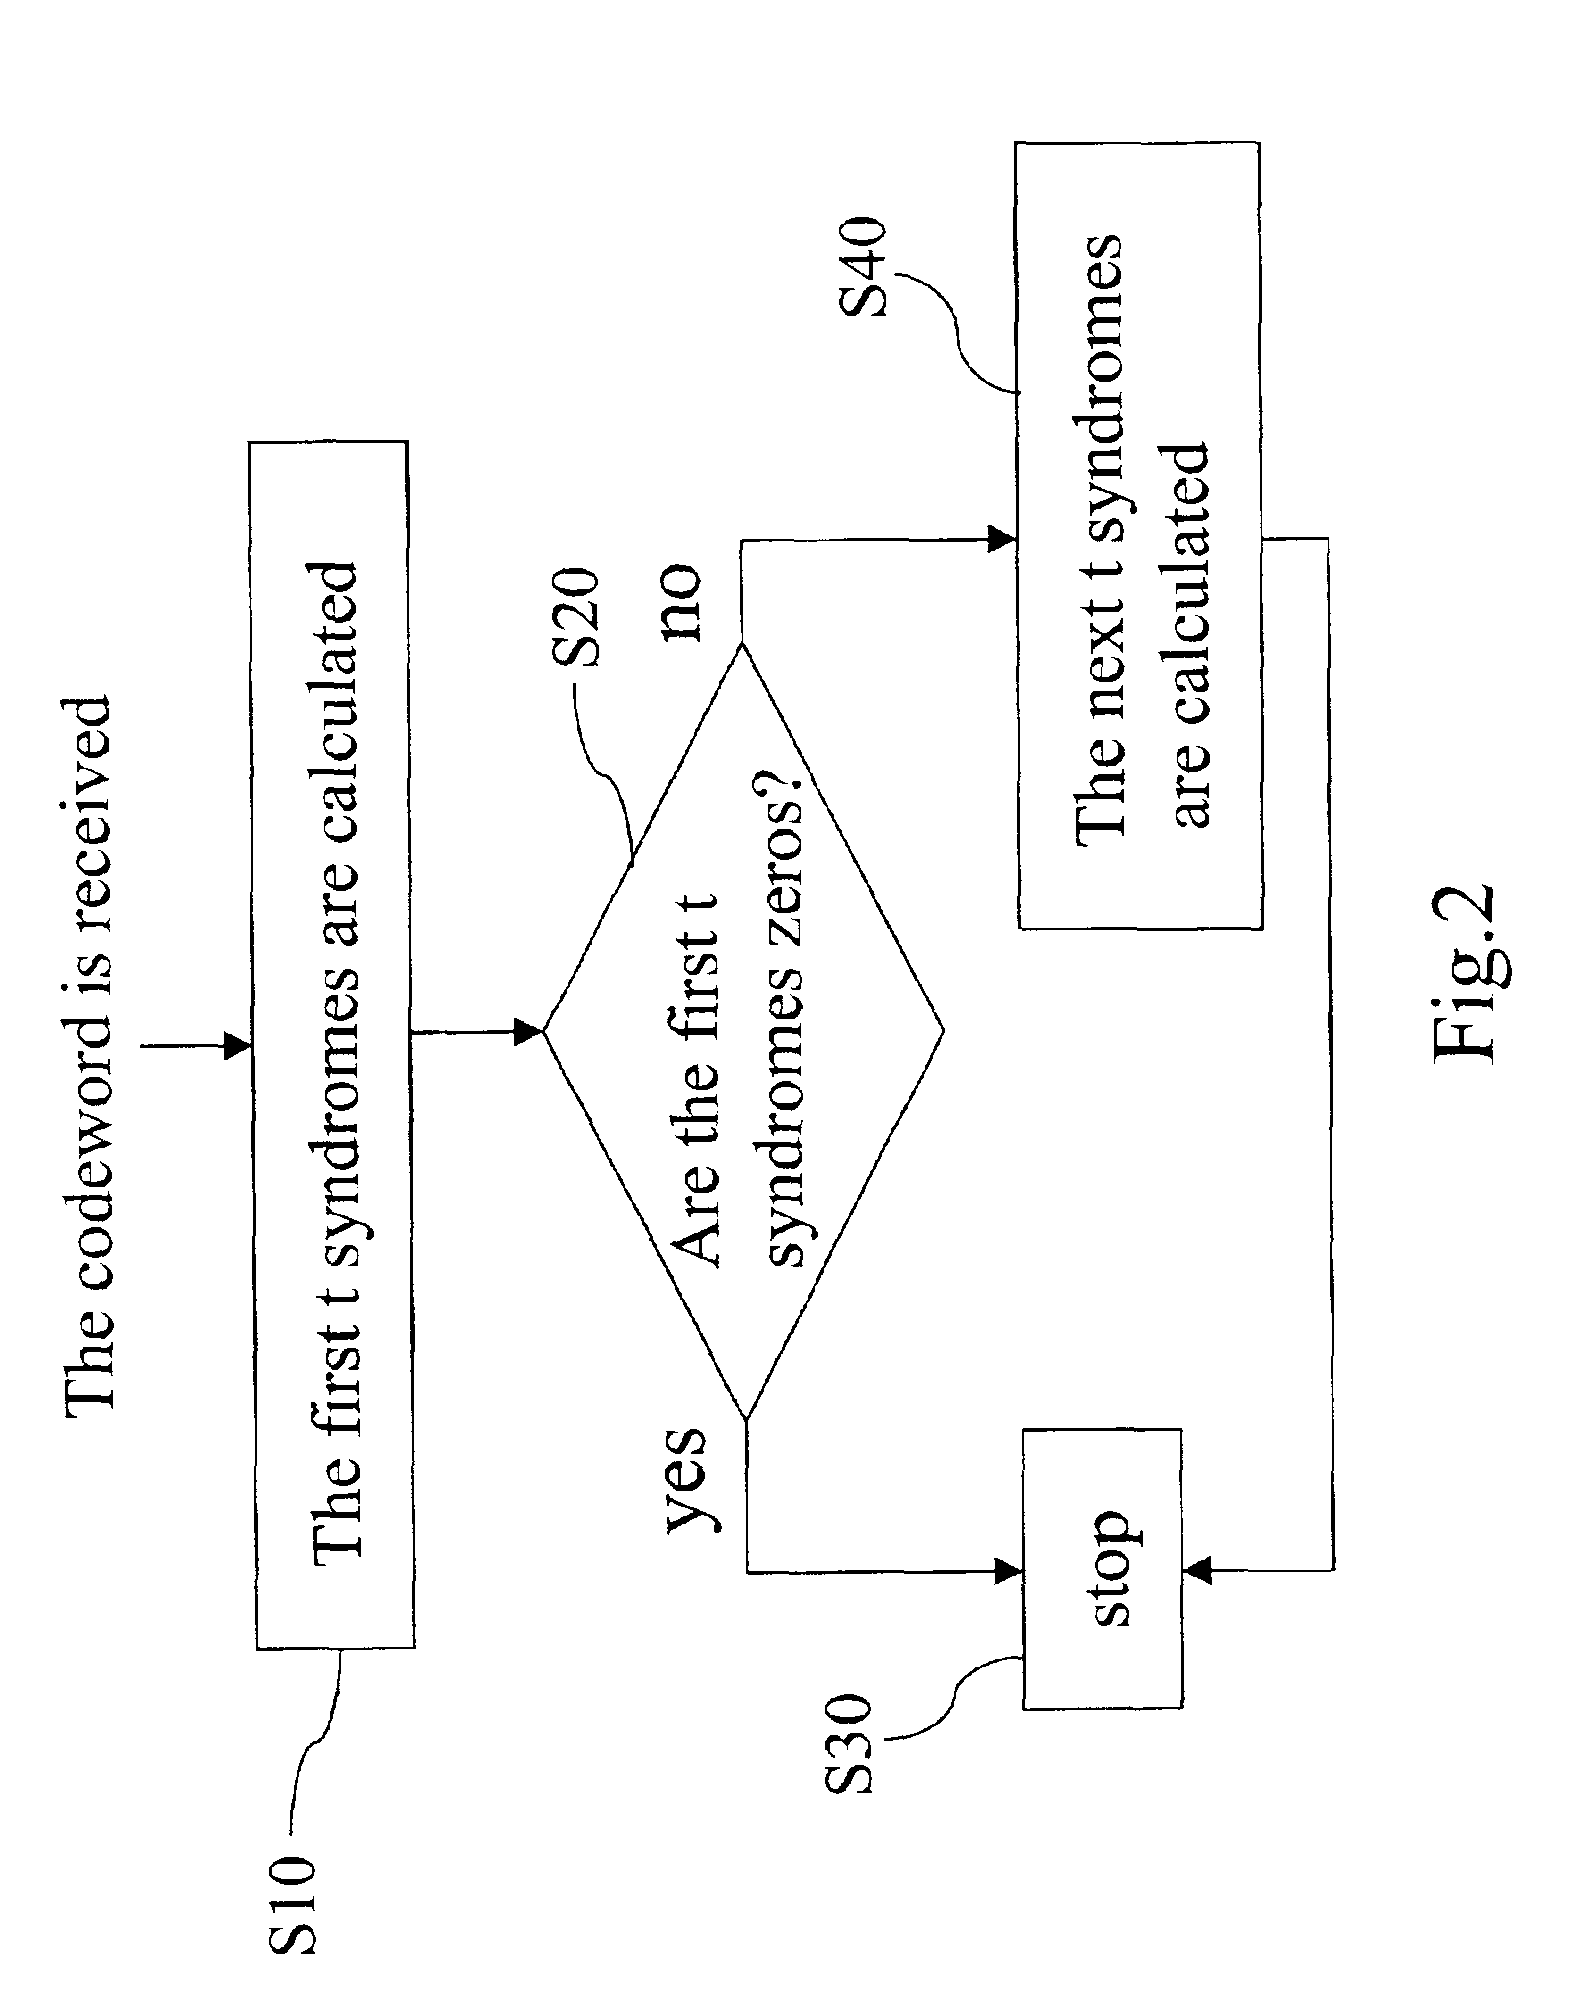 Method for calculating syndrome polynomial in decoding error correction codes